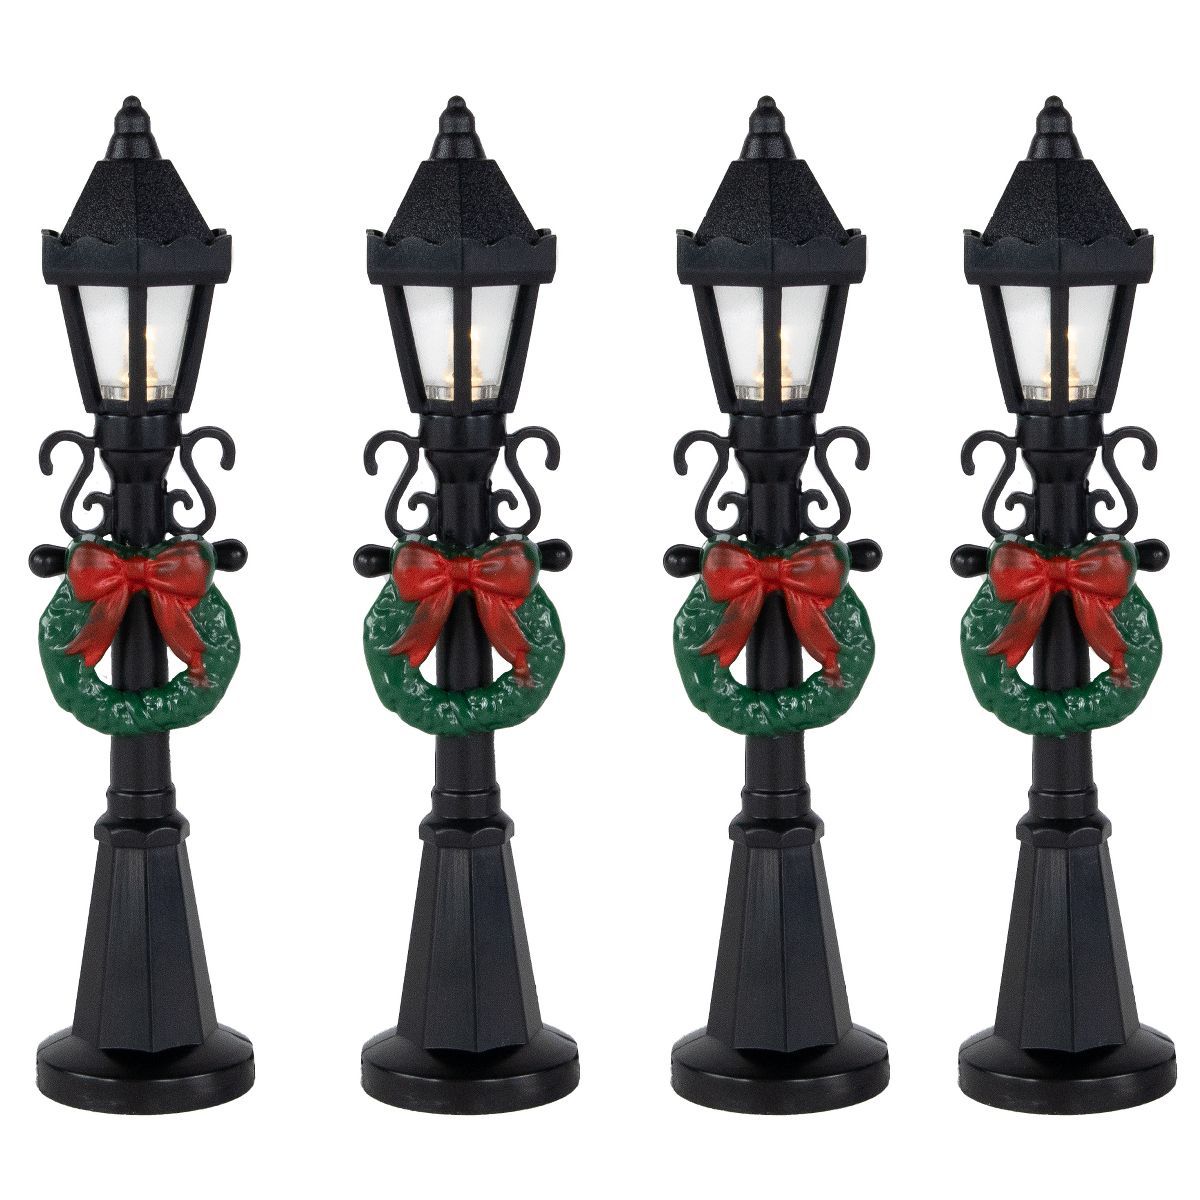 Northlight Set of 4 Lighted Street Lamps Christmas Village Display Pieces - 4.75" | Target